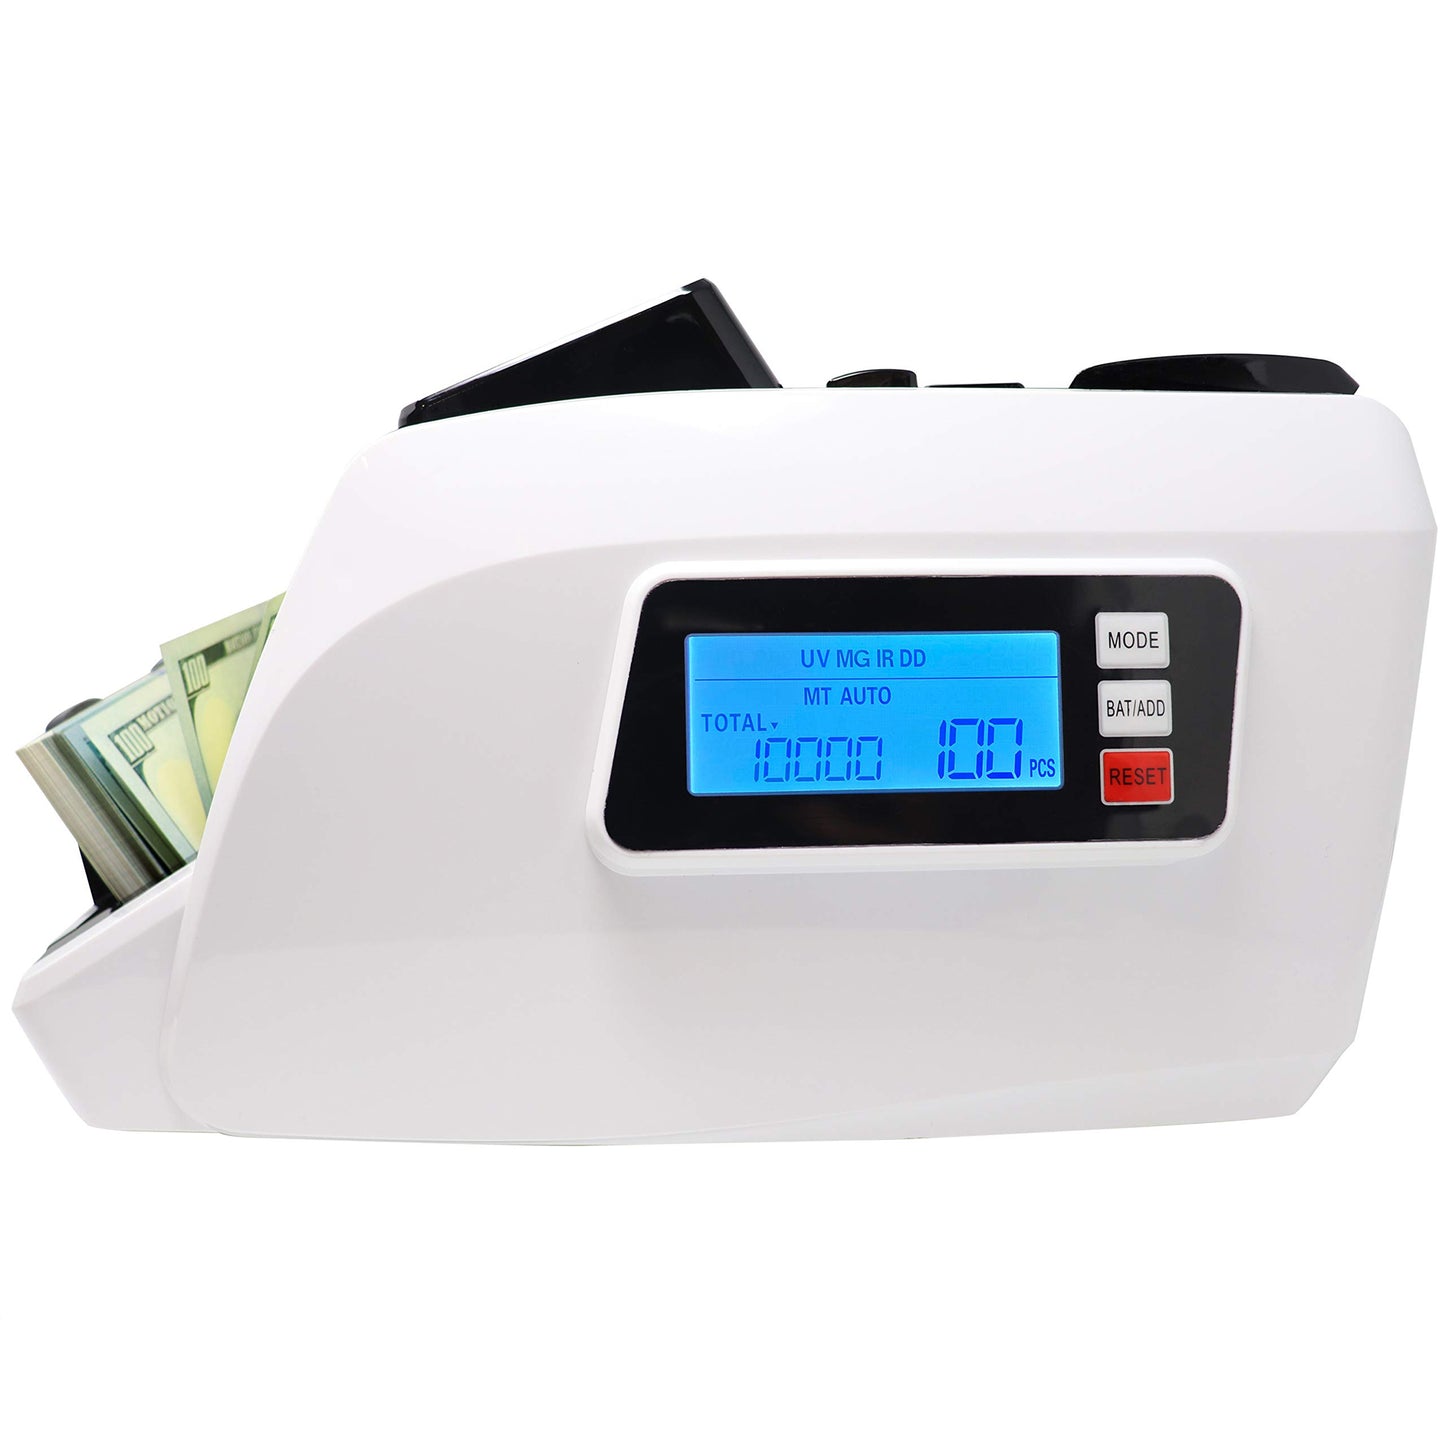 Nadex V5400 Mixed Denomination Money Counter and Counterfeit Detector